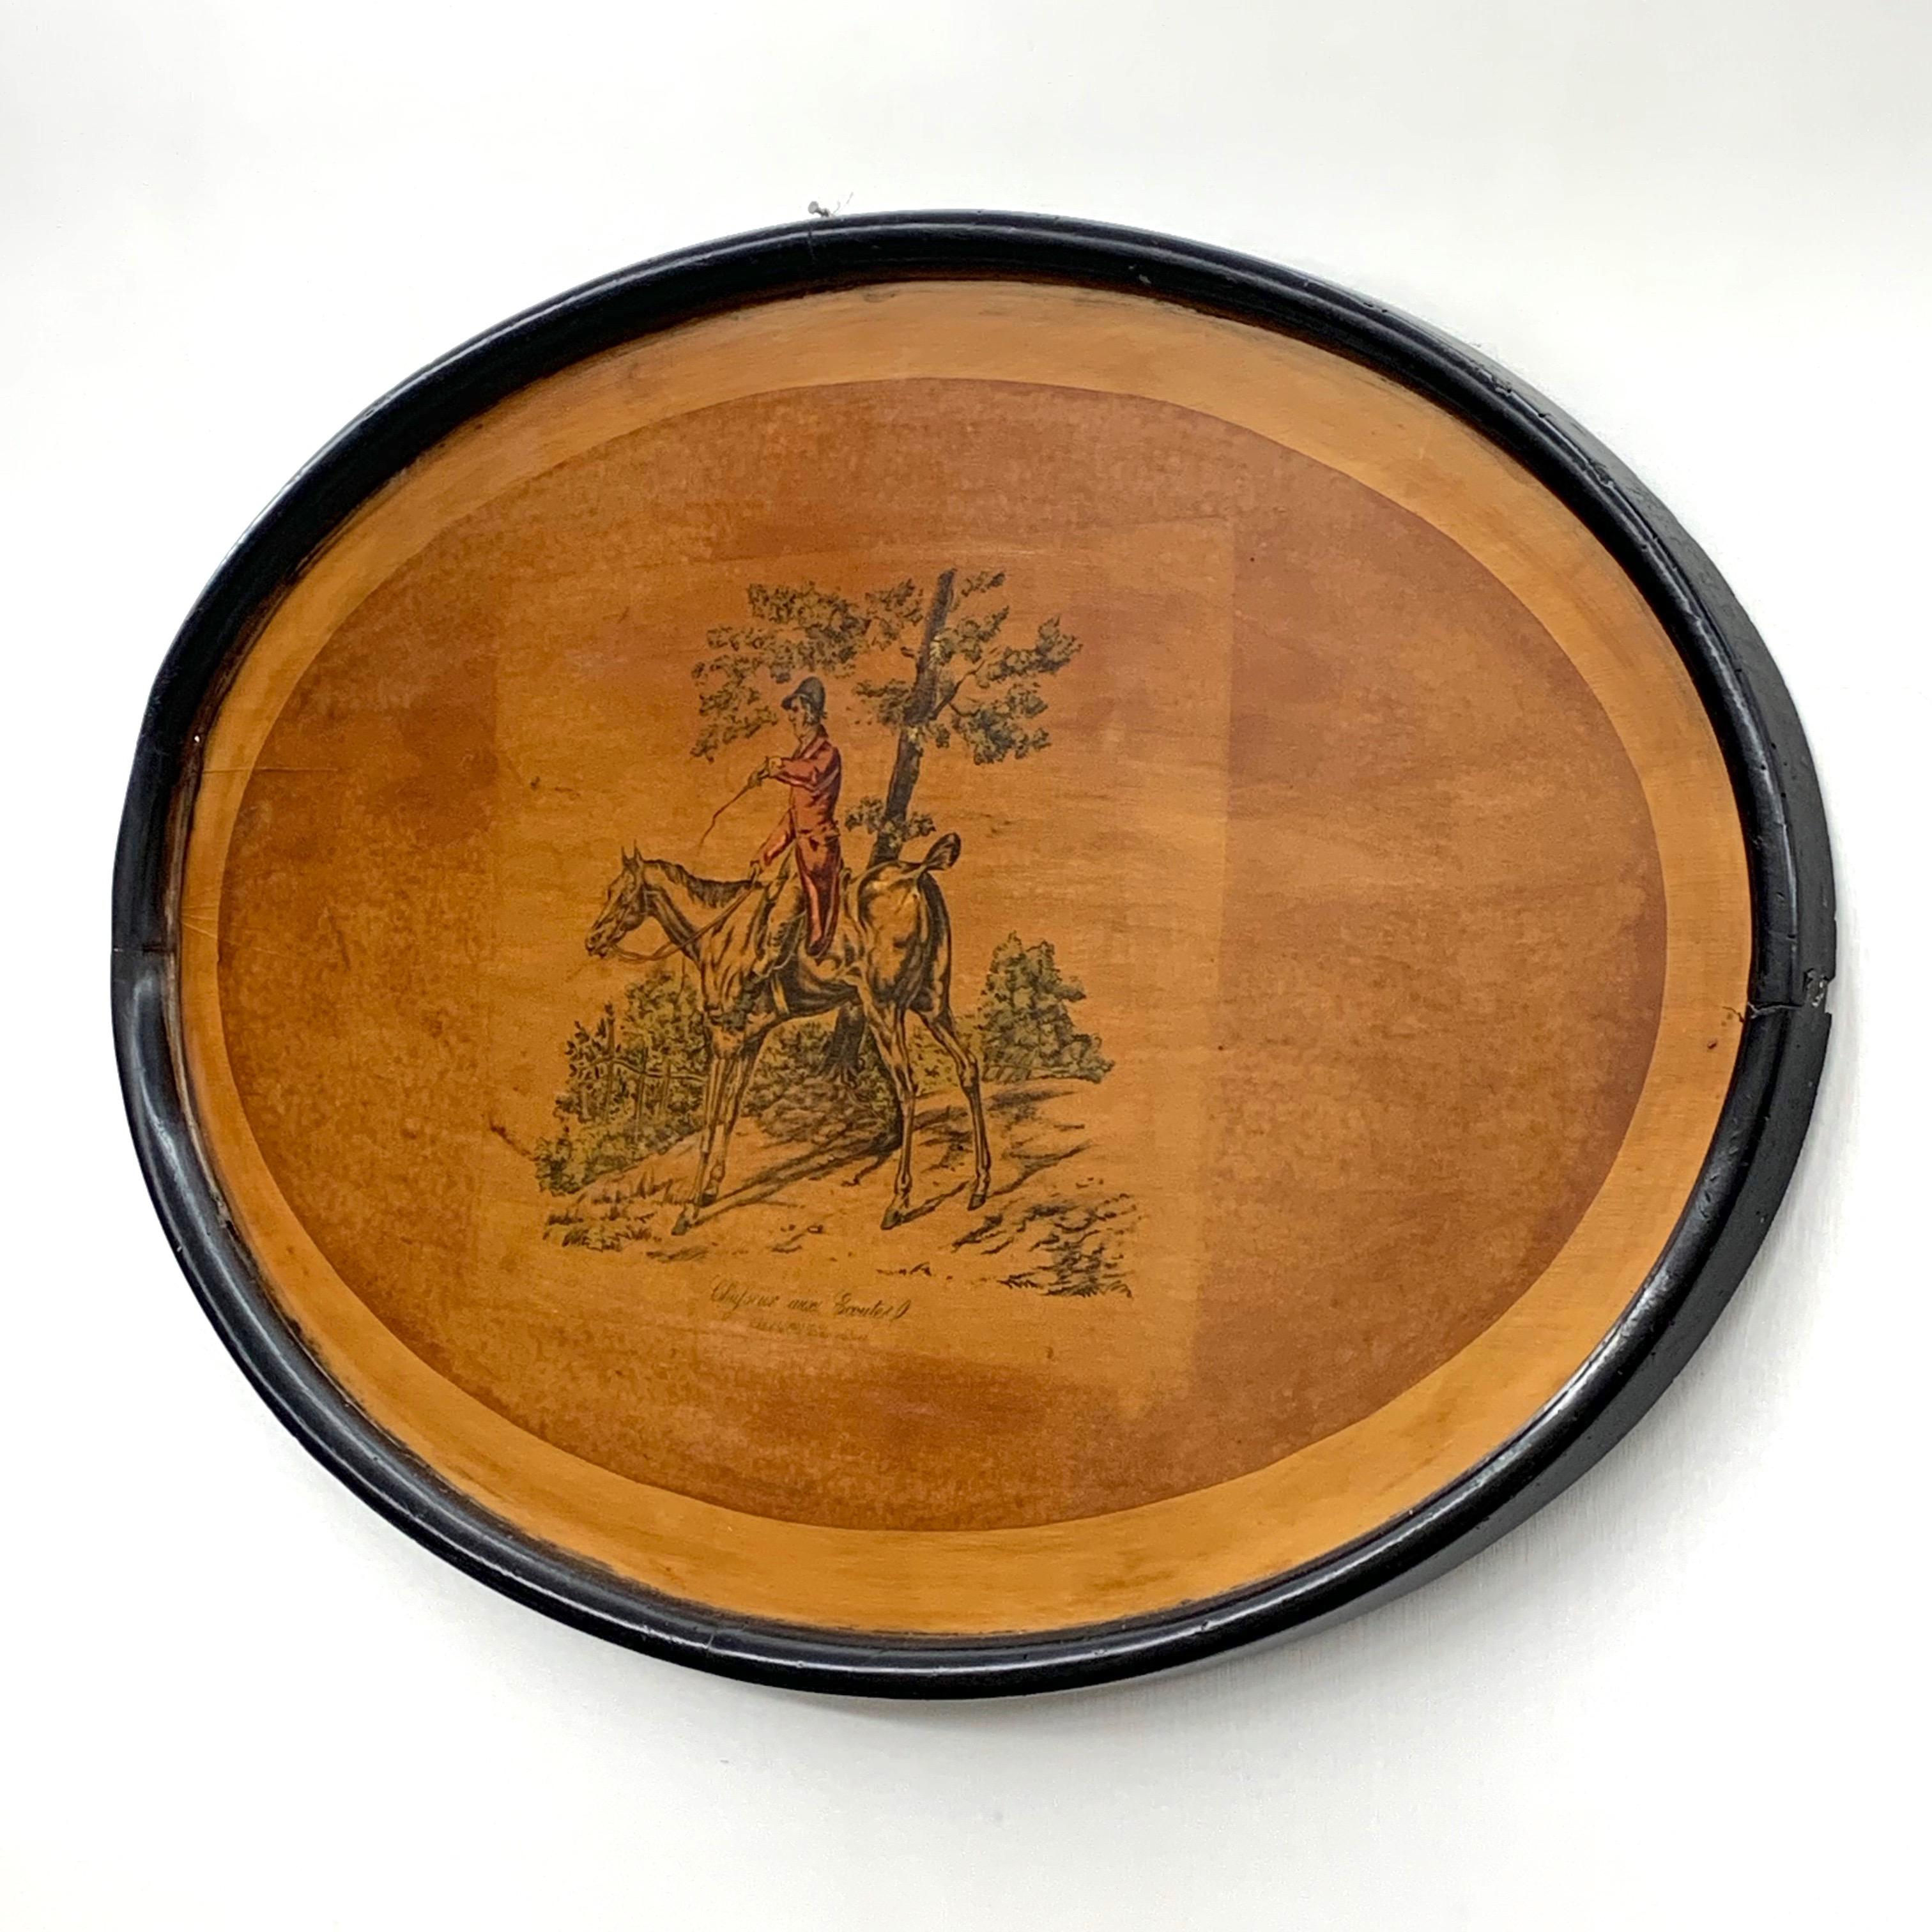 This beautiful and large tray can be used on a table or even as a painting. It's wonderful hanging like a work of art on your wall and will add a splash of color to every room.
Measures 80 x 50 cm - 31.5 x 19.7 inc.